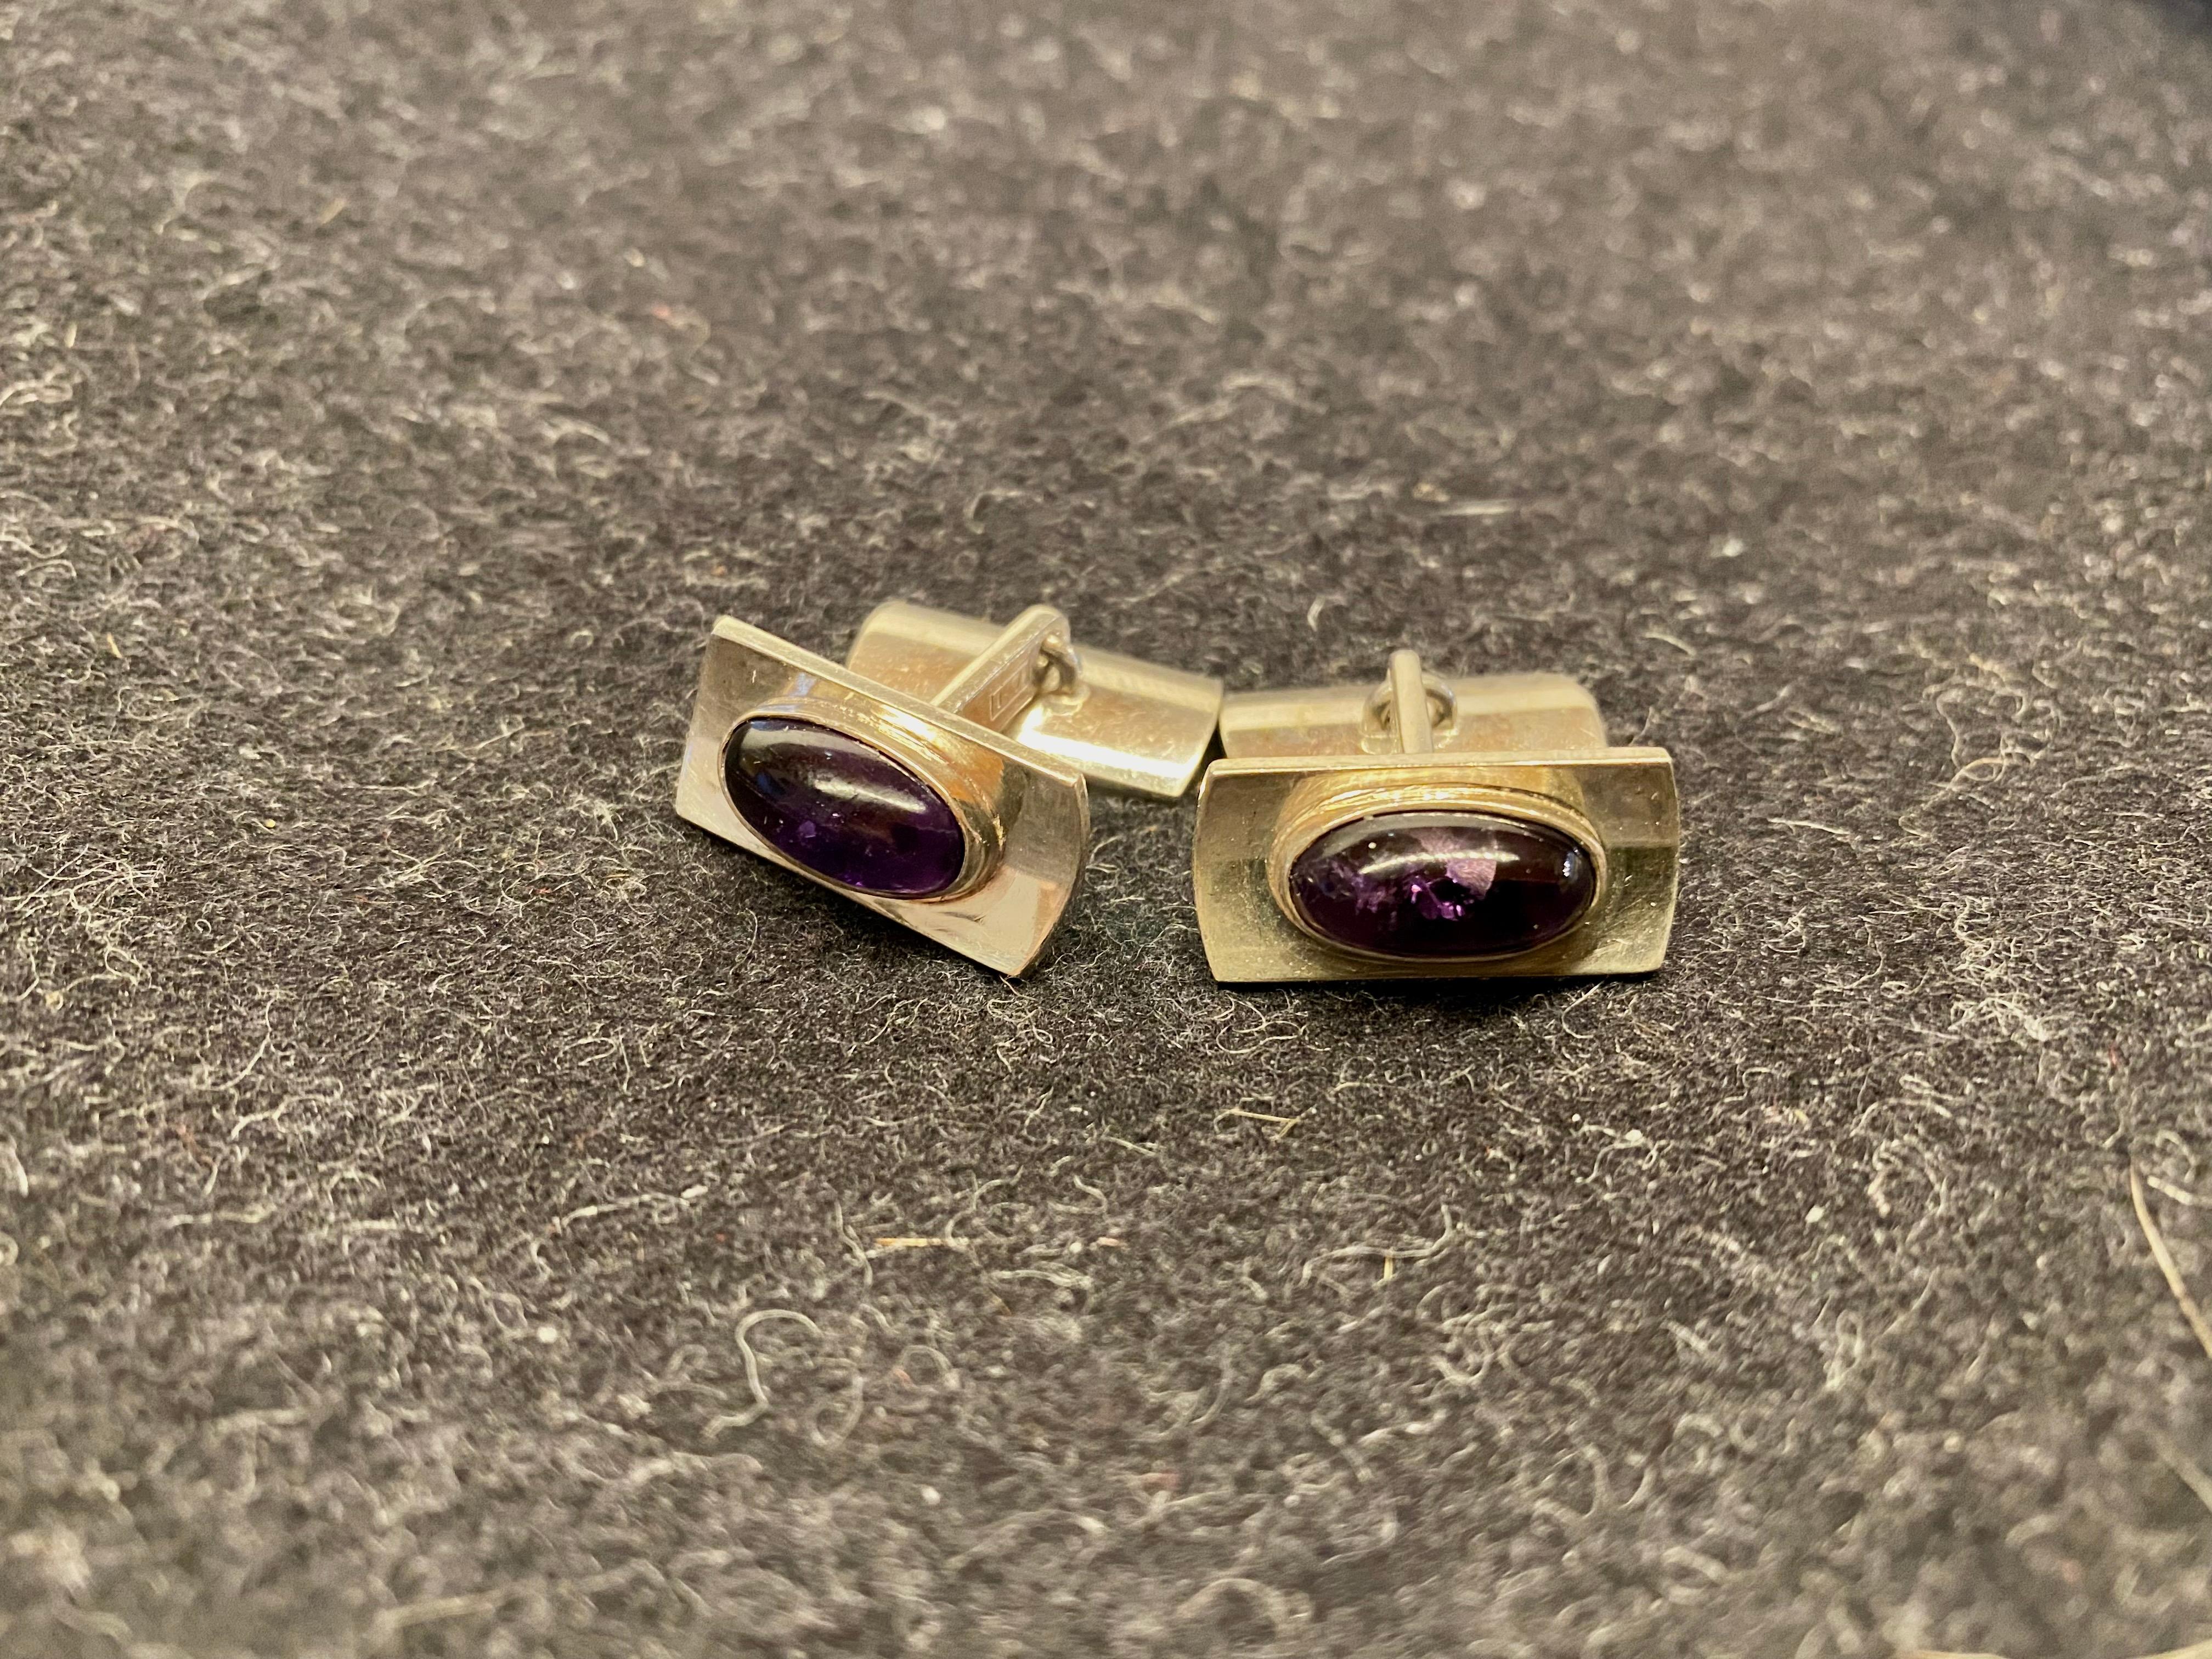 Silver Cufflinks by Elis Kauppi for Kupittaan Kulta, Finland, Amethyst
Made in Finland 1962
813H Silver
Engraving the letters HS, 11.5.68